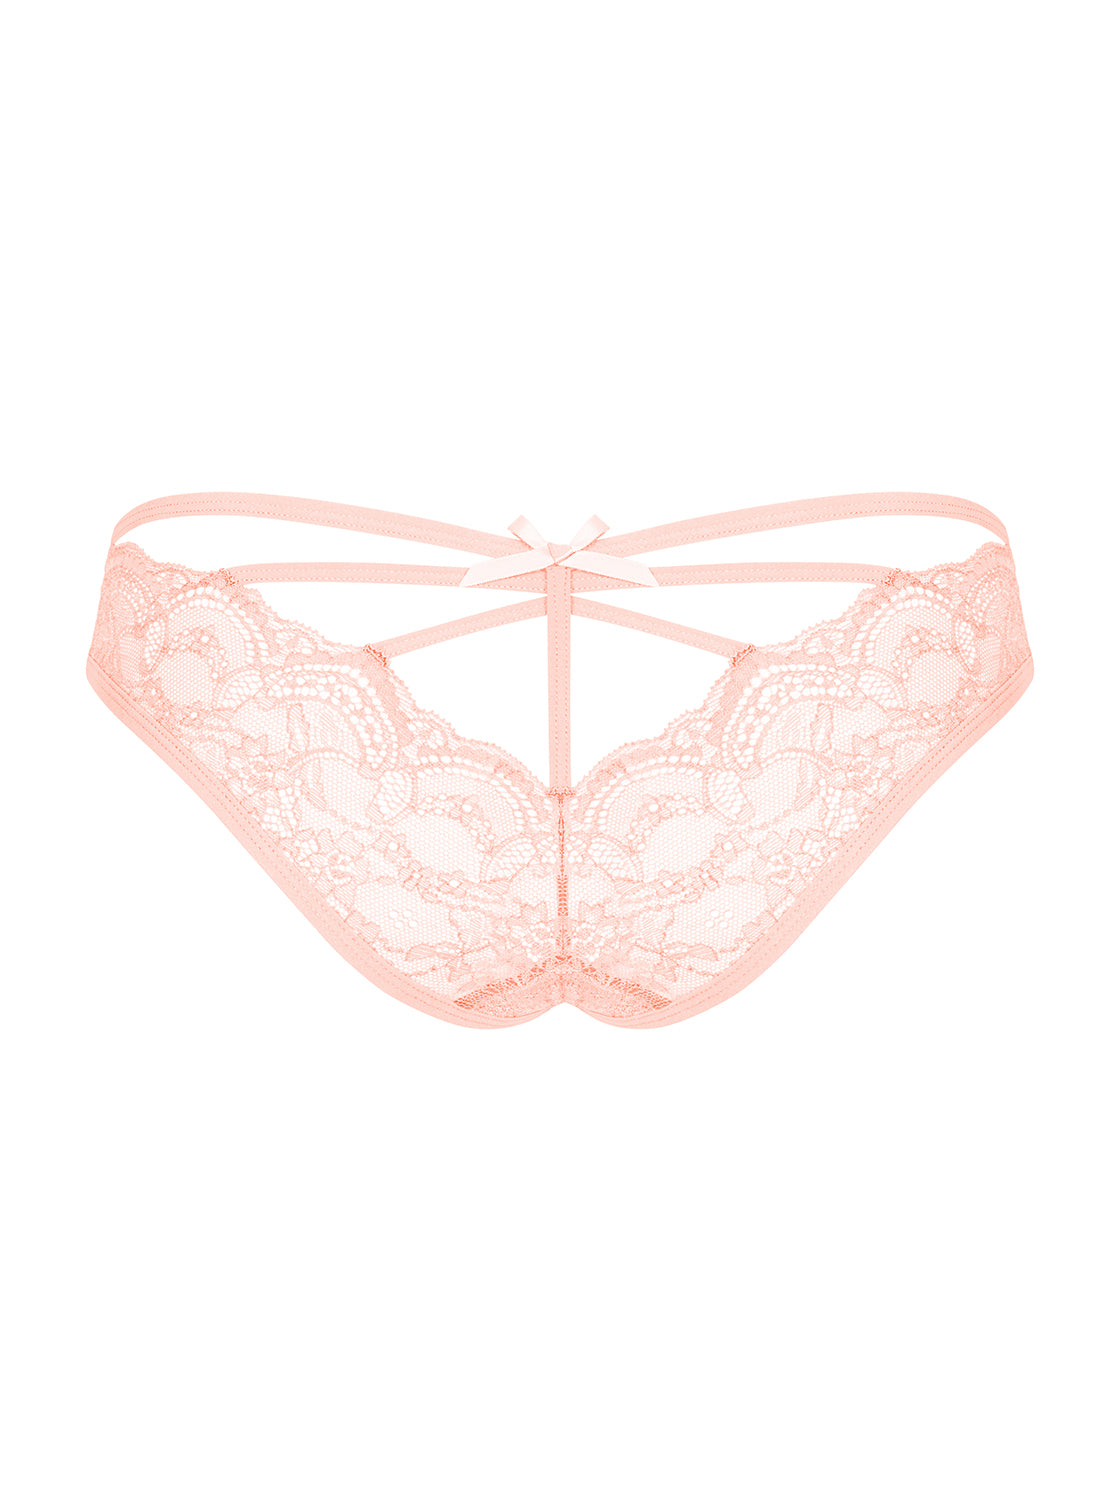 Frivolla lace panties in pink